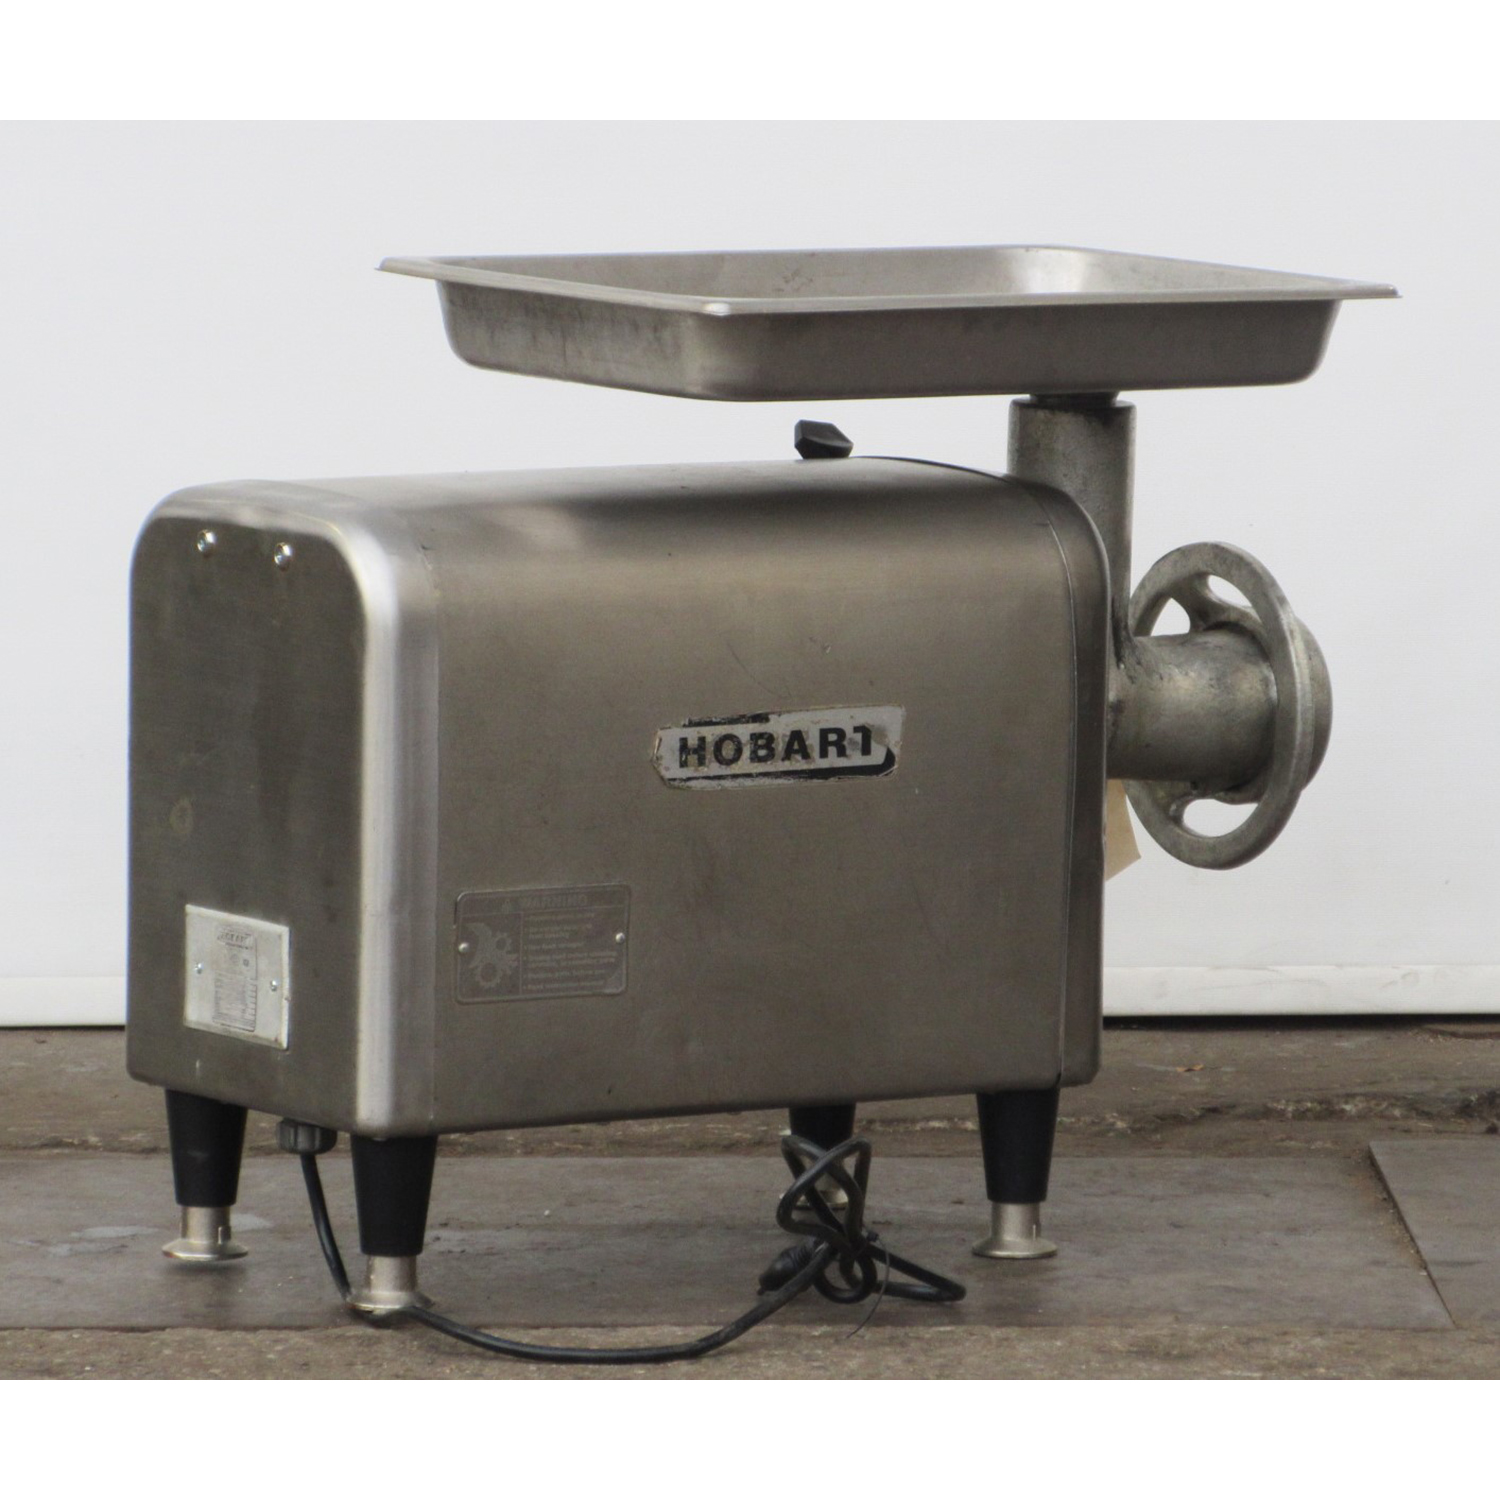 Hobart 4822 Meat Grinder, Used Excellent Condition image 2